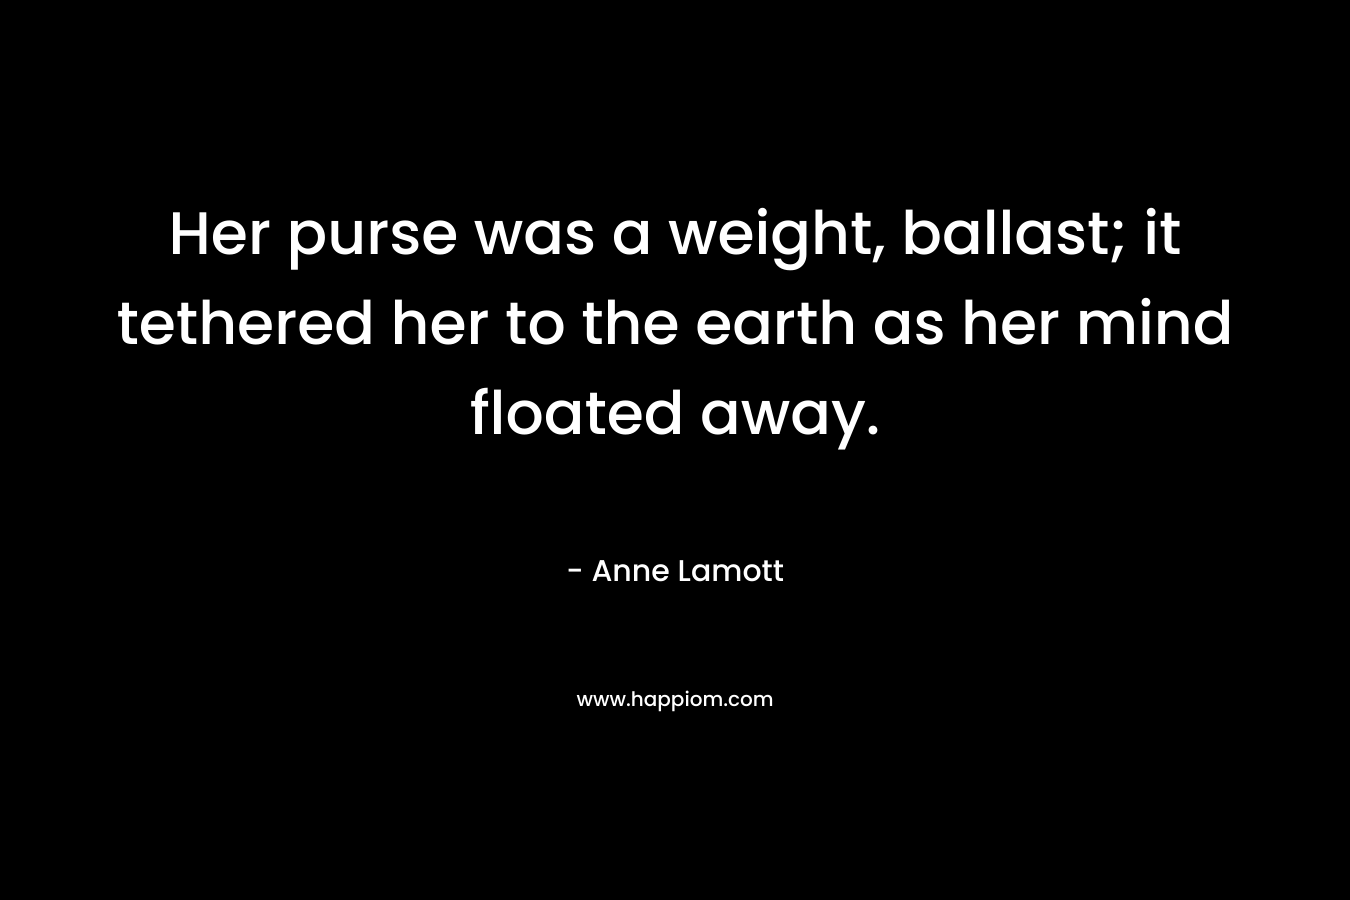 Her purse was a weight, ballast; it tethered her to the earth as her mind floated away. – Anne Lamott